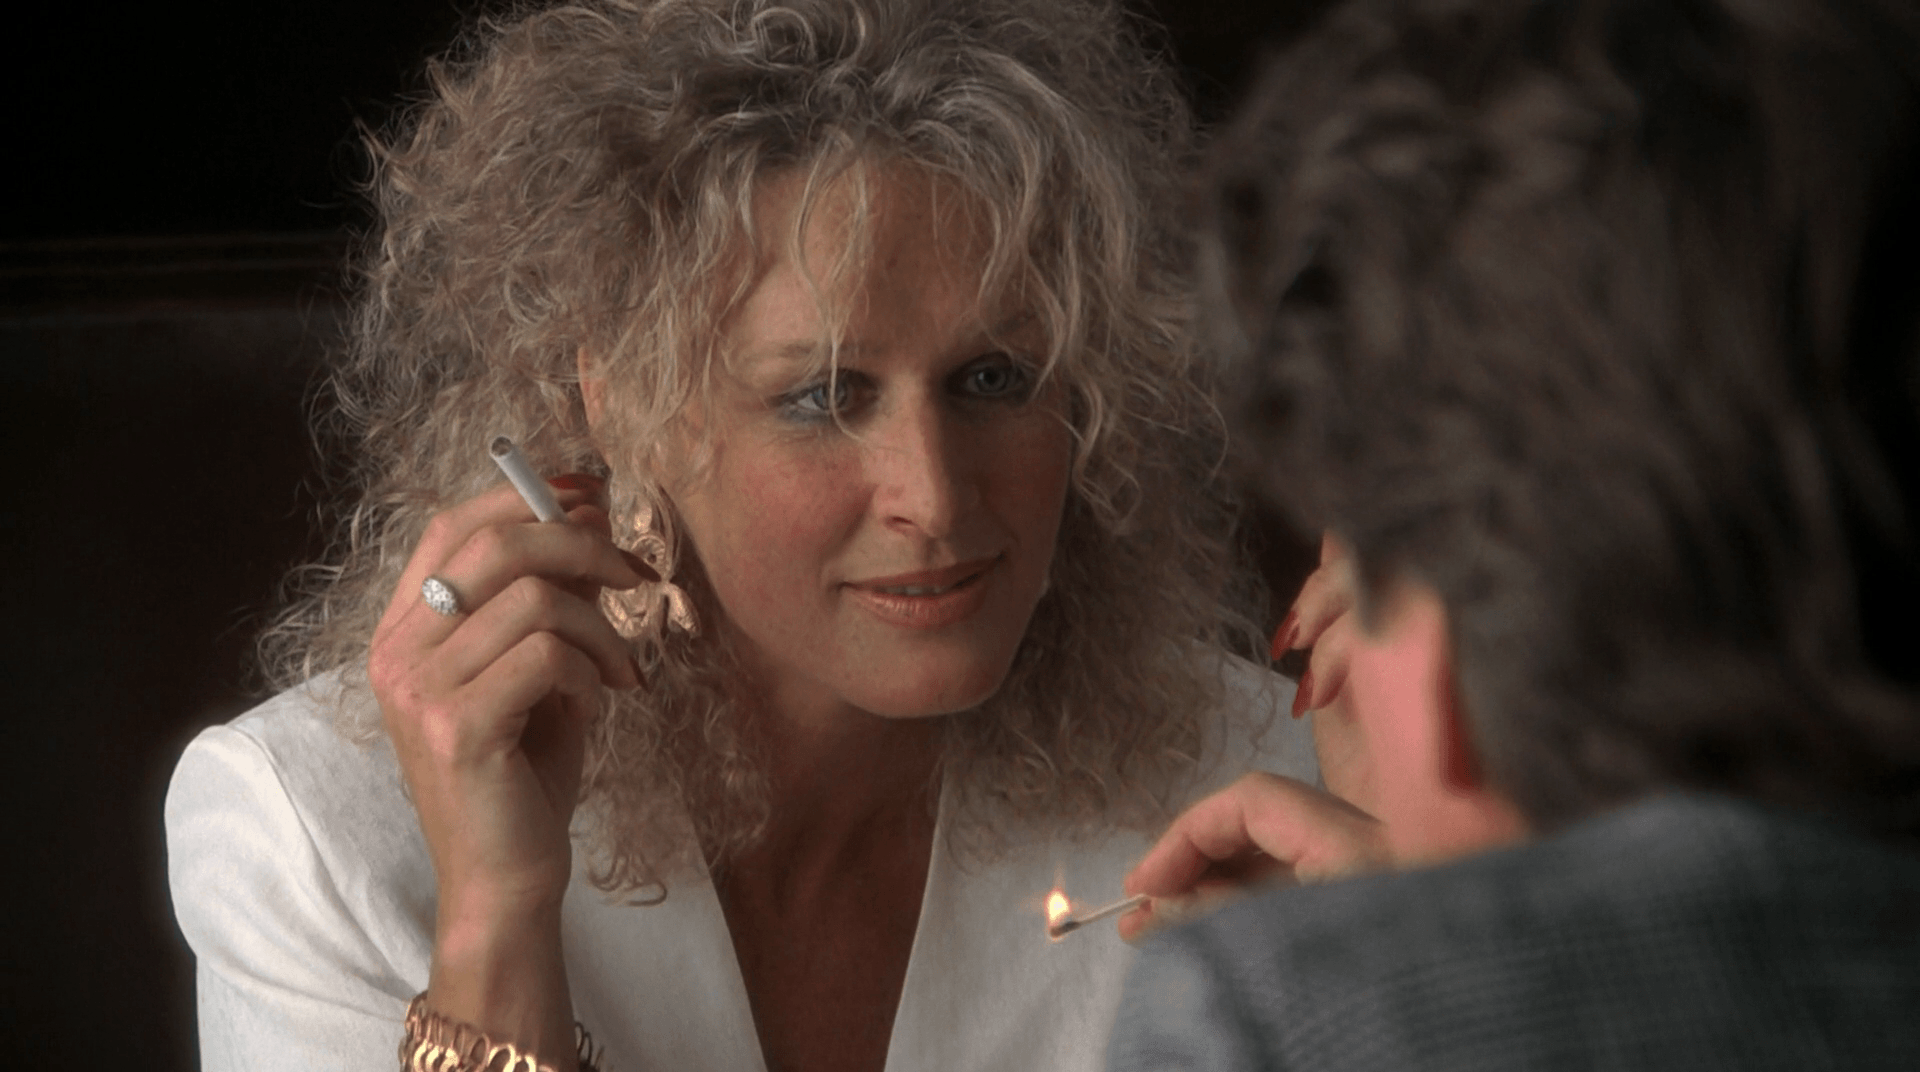 Glenn Close in Fatal Attraction. I'm not going to be ignored, Dan